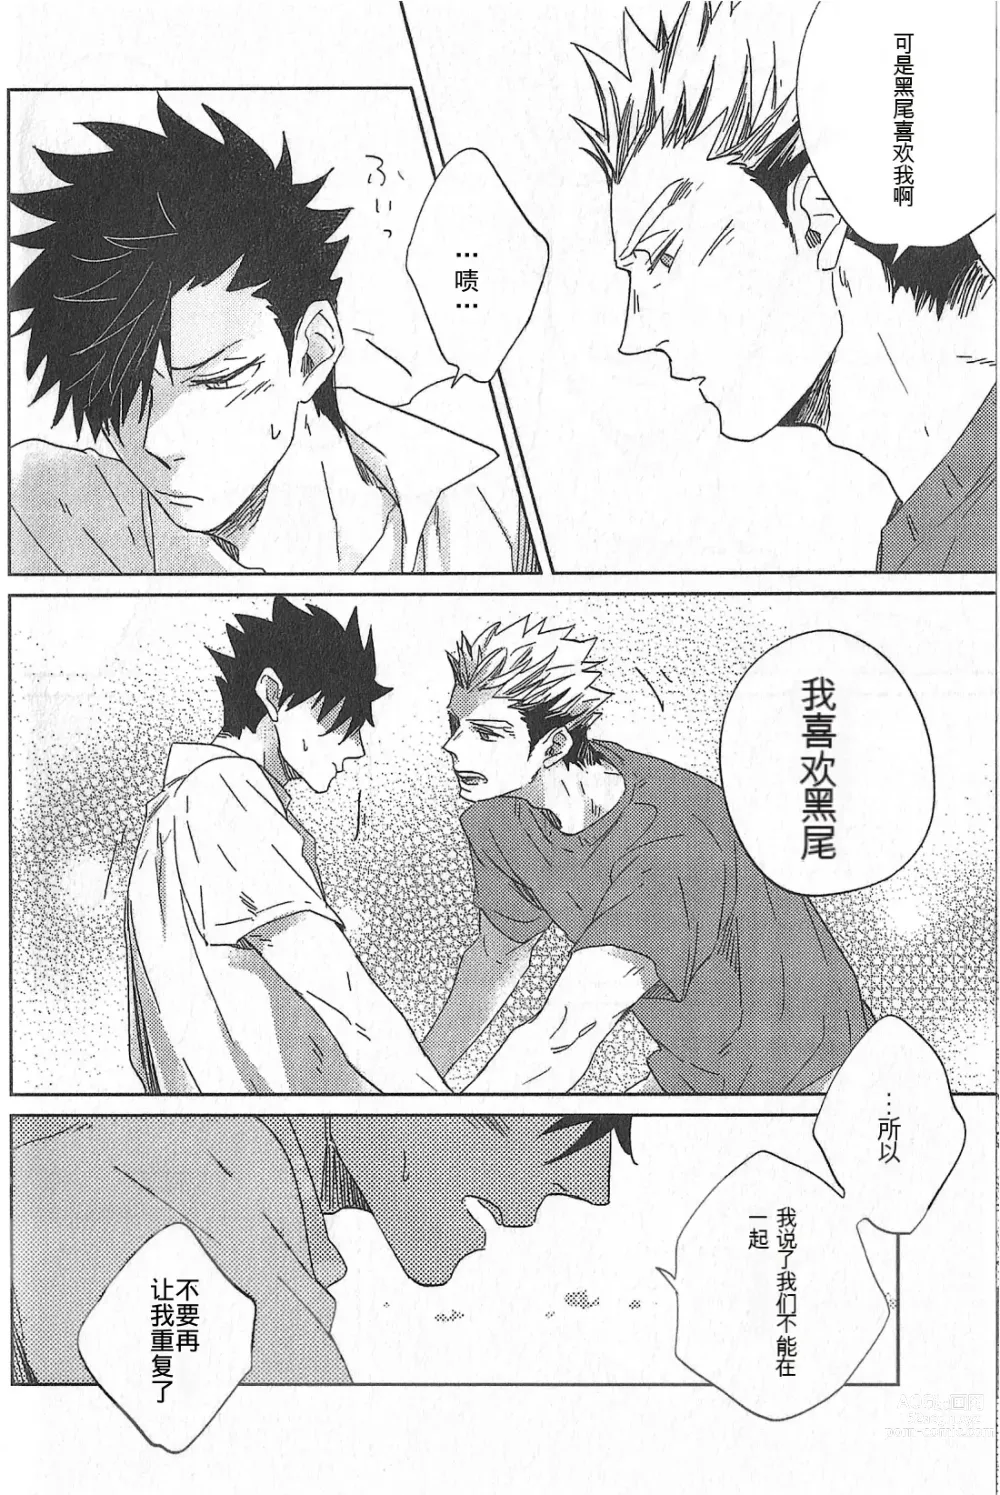 Page 9 of doujinshi 极境的野兽 前篇